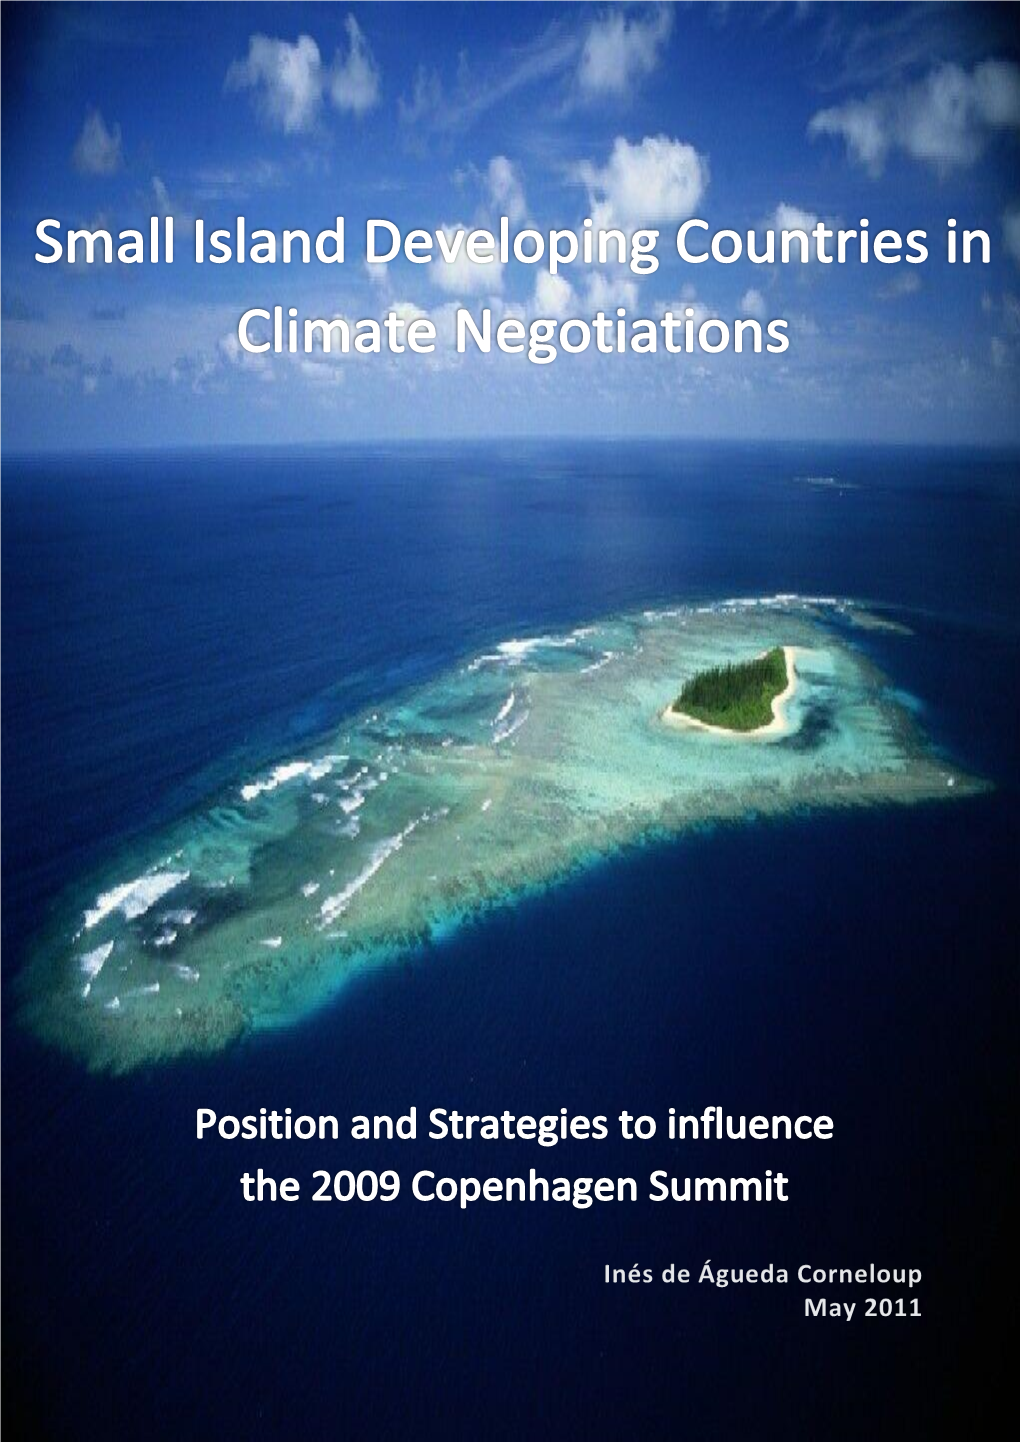 Small Island Developing Countries in Climate Negotiations